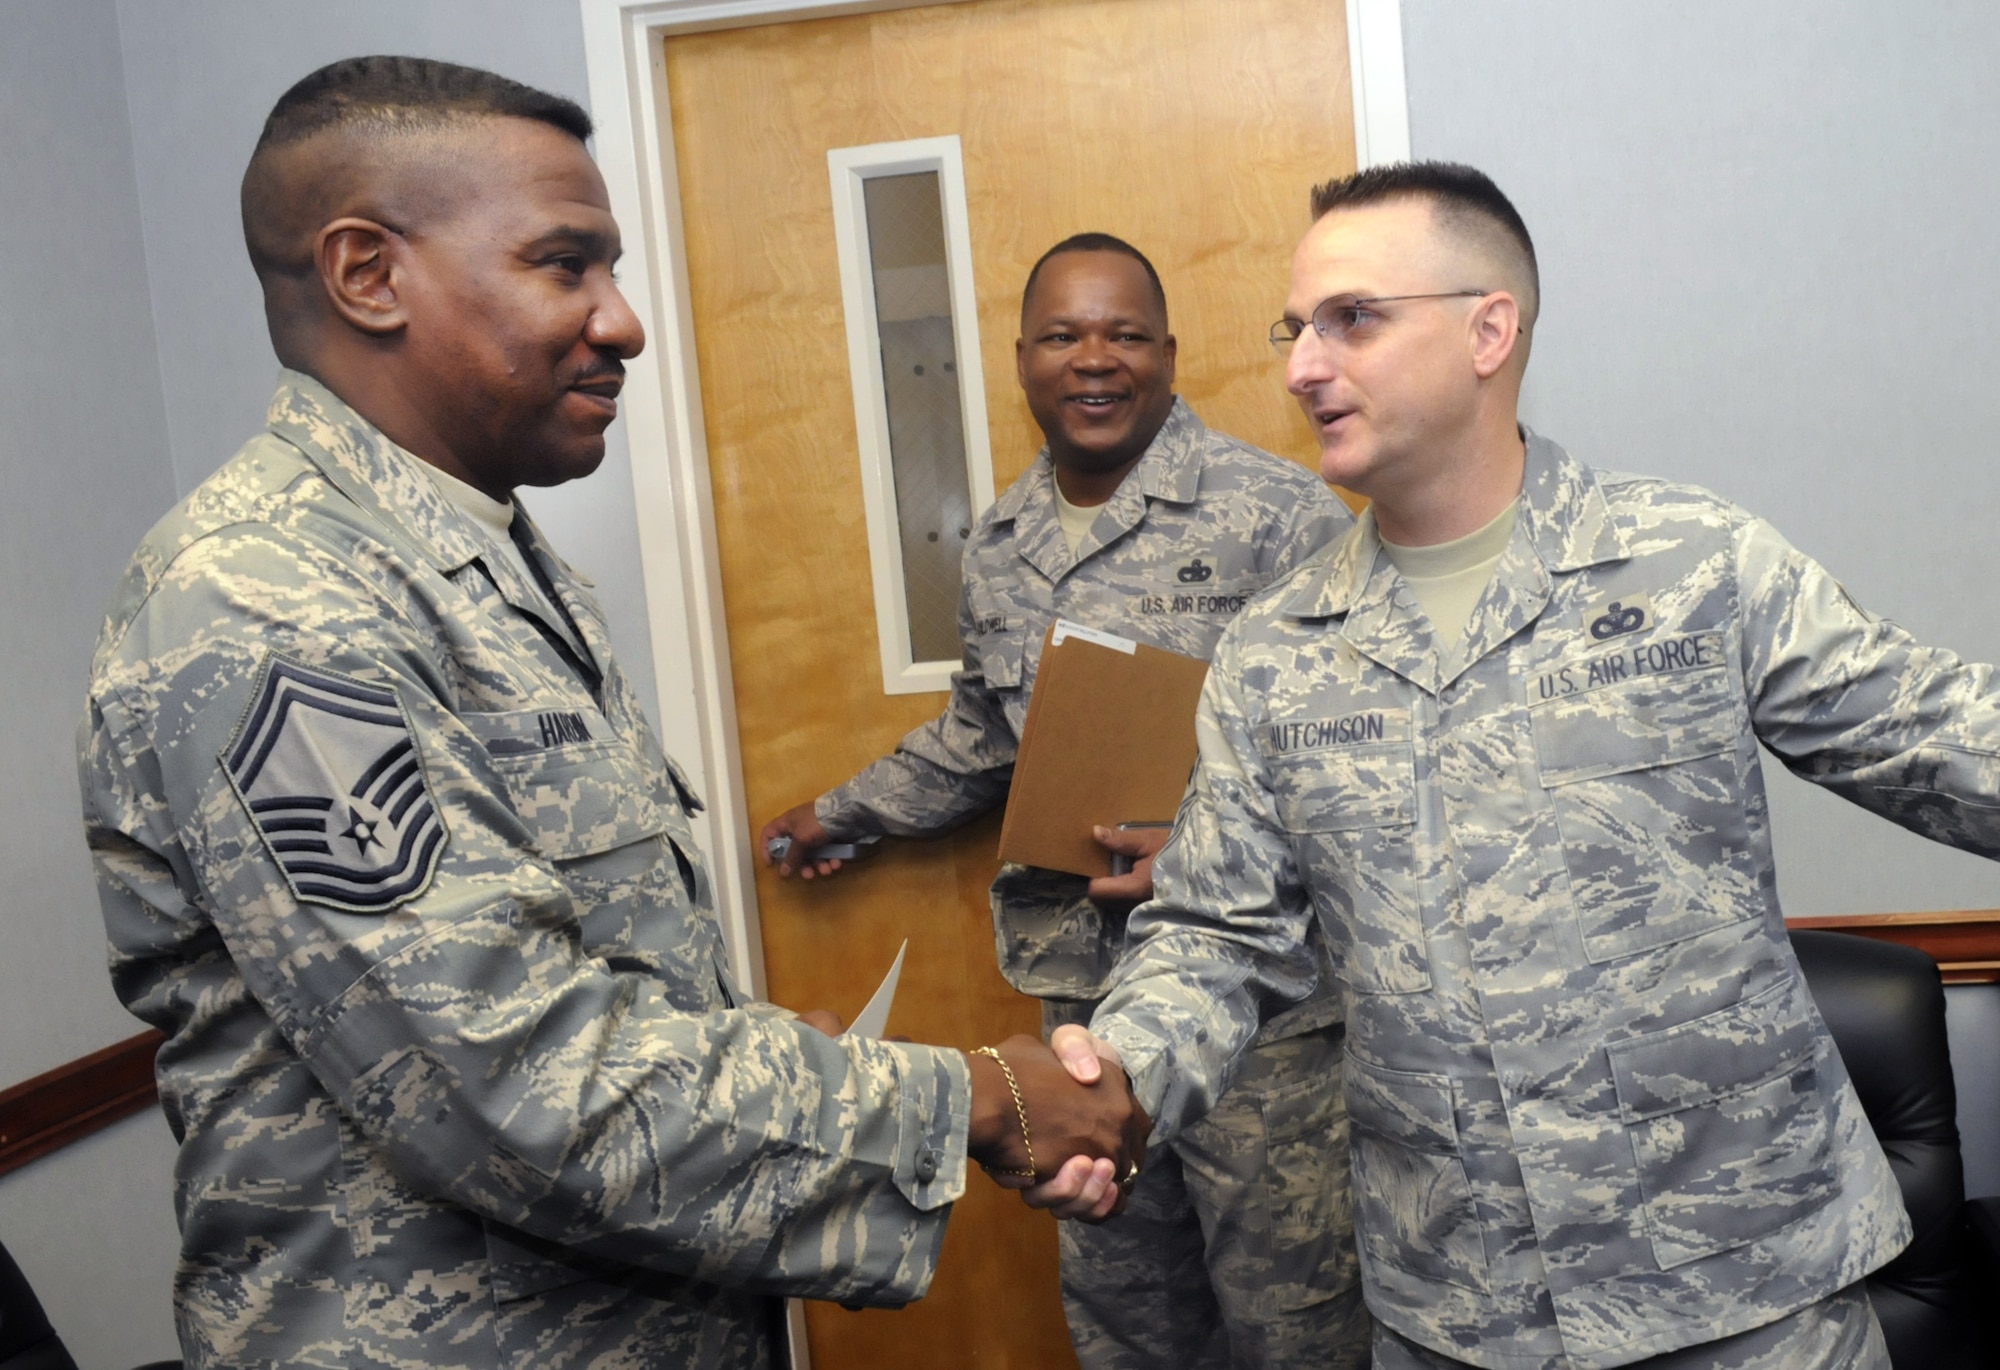 L-R, Senior Master Sergeant Wesley L. Hardin, 78th Medical Support Squadron, is congratulated by CMSgt. Otis Caldwell, Robins Chiefs Groups president, and 78th Air Base Wing Command Chief Master Sergeant Harold "Buddy" Hutchison in a surprise visit Nov. 5. Members of the Robins Chiefs Group along with Chief Hutchison and Col. Lee-Ann Perkins, 78th FSS commander, boarded a bus to make the rounds to congratulate members of Robins who made the Chief promotion list Nov. 5. Other promotees are Keith D. Davis, Jr., 78th Security Forces Squadron, Lori A. Gawan, 78th Logistics Readiness Squadron, Phillip G. Gawan, HQ Air Force Reserve, Gregory C. Joy, 116th Maintenance Group, and Wanda Y. Lee, 116th Maintenance Squadron. U. S. Air Force photo by Sue Sapp